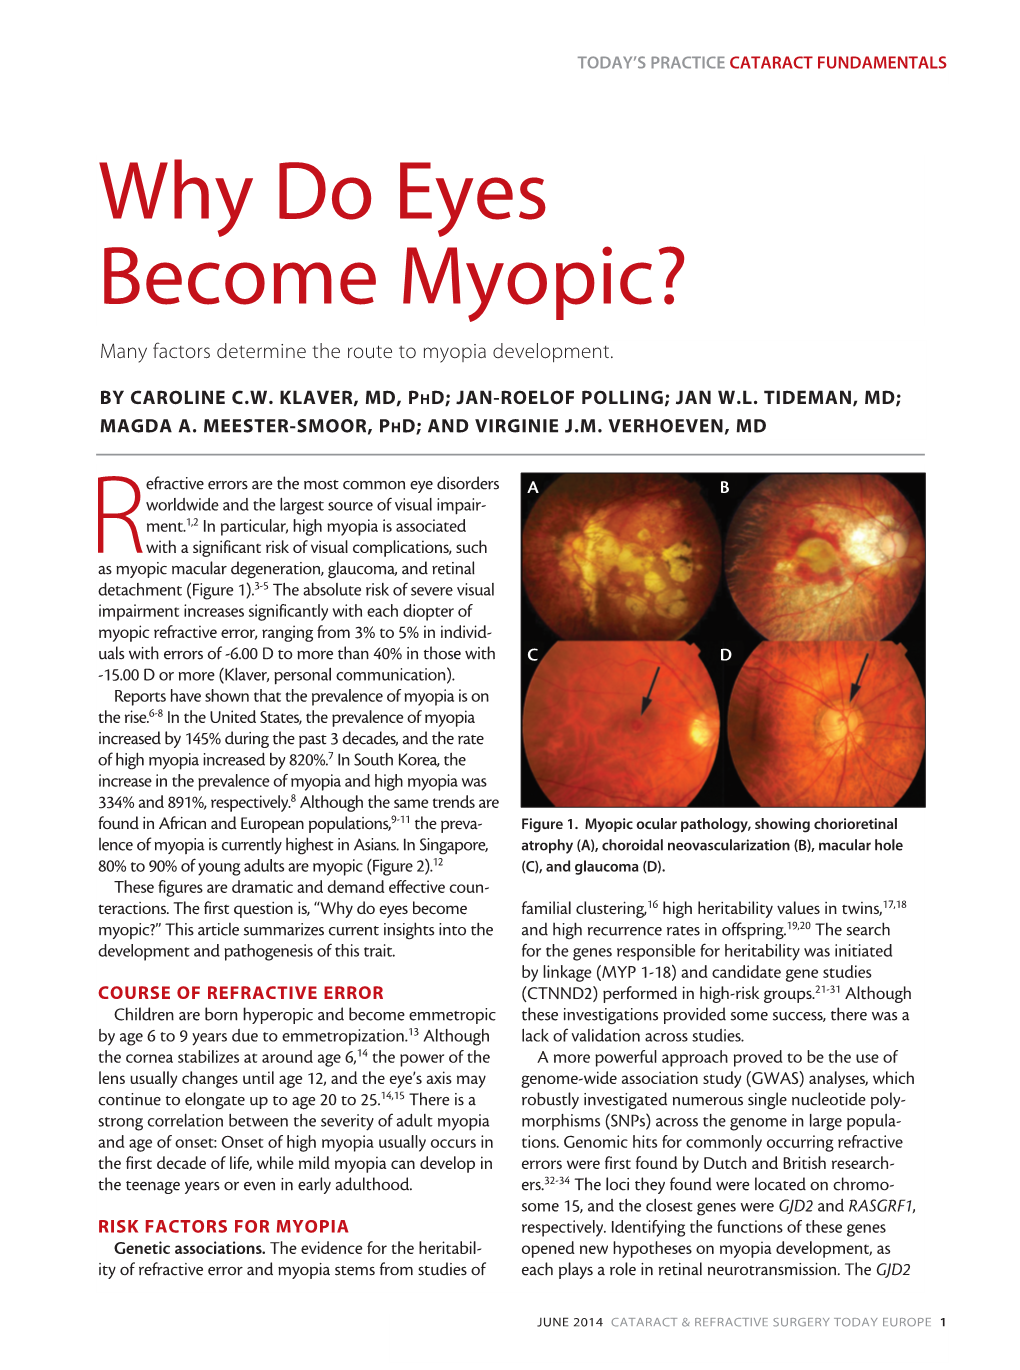 Why Do Eyes Become Myopic? Many Factors Determine the Route to Myopia Development